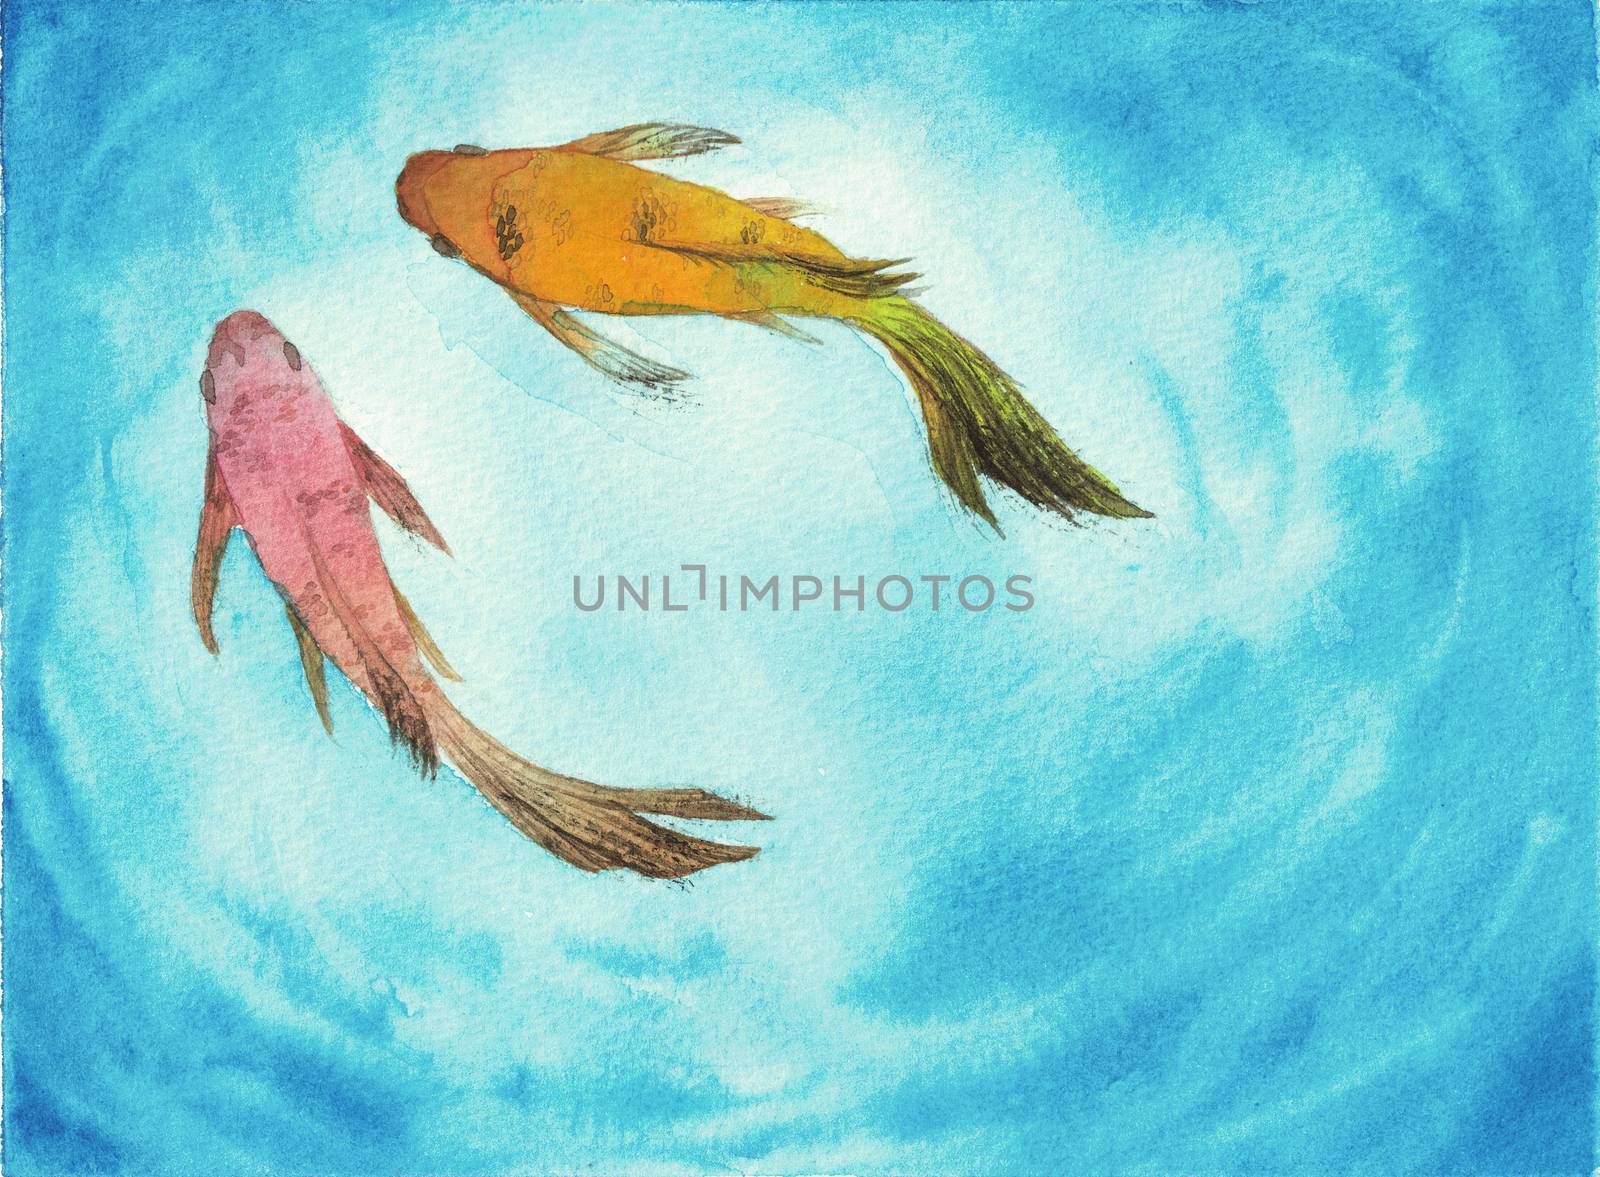 Watercolor hand painting, two koi carp fish in pond, symbol of good luck and prosperity